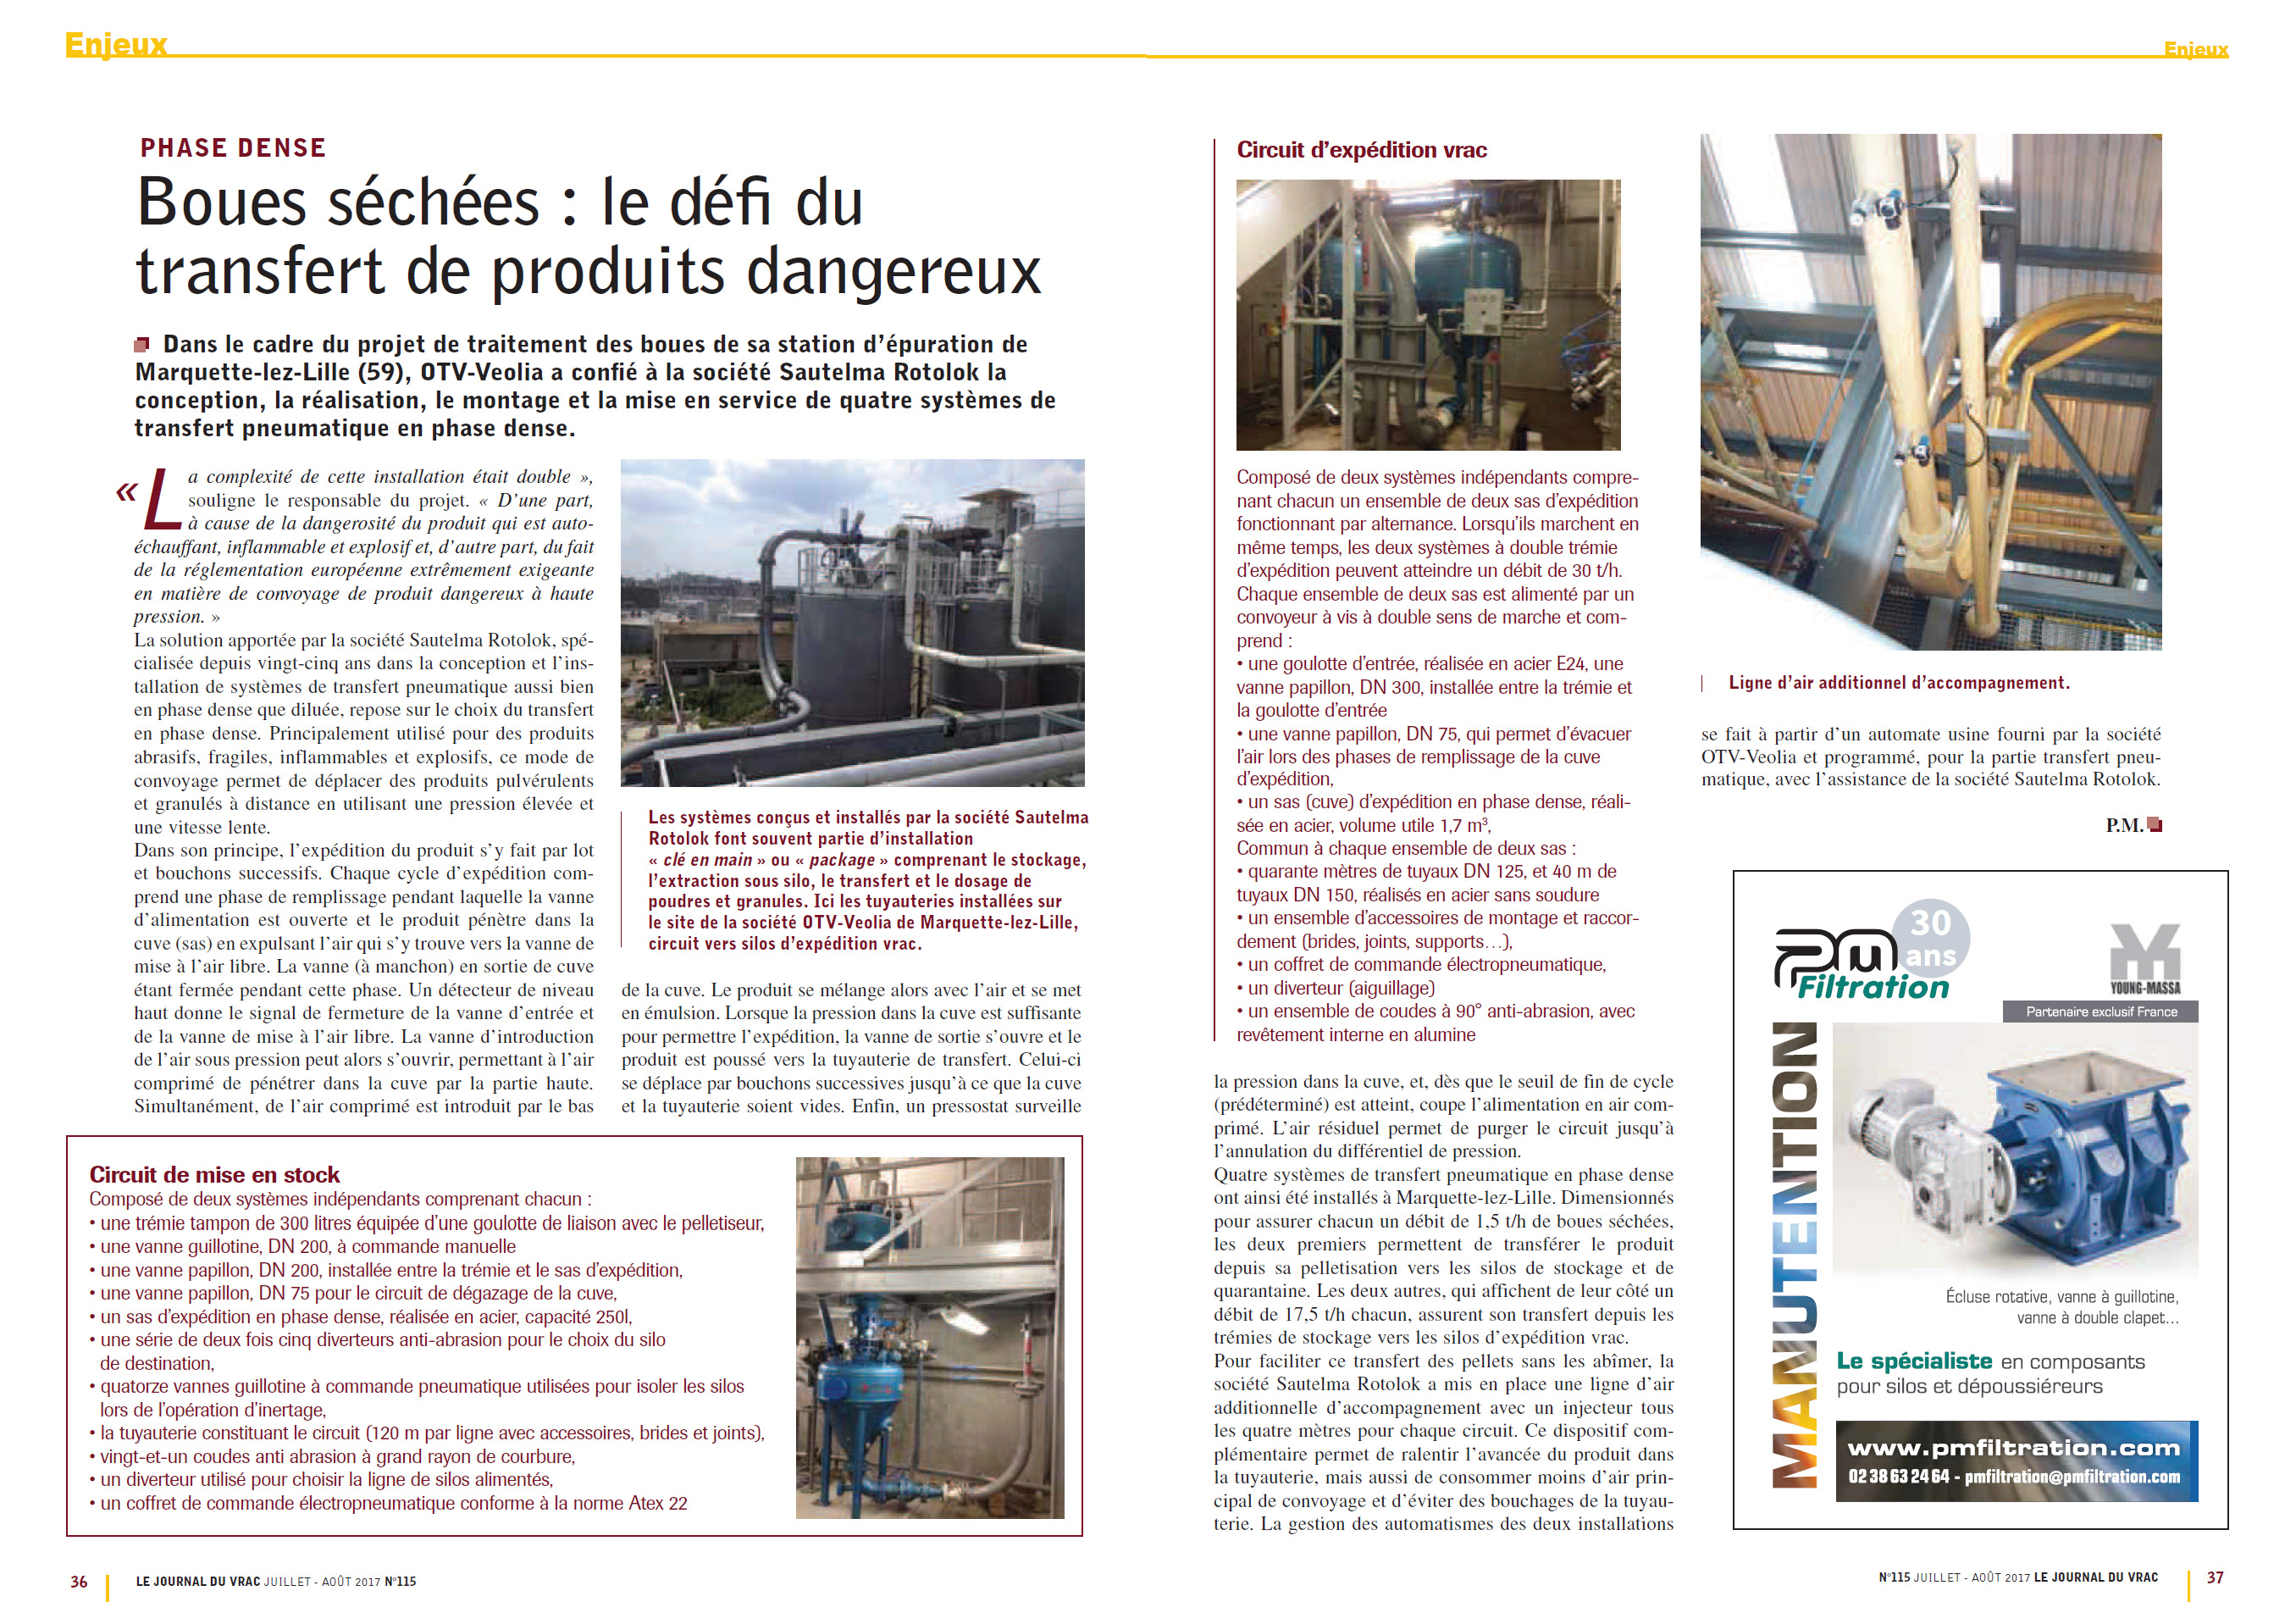 Article Boues sechees